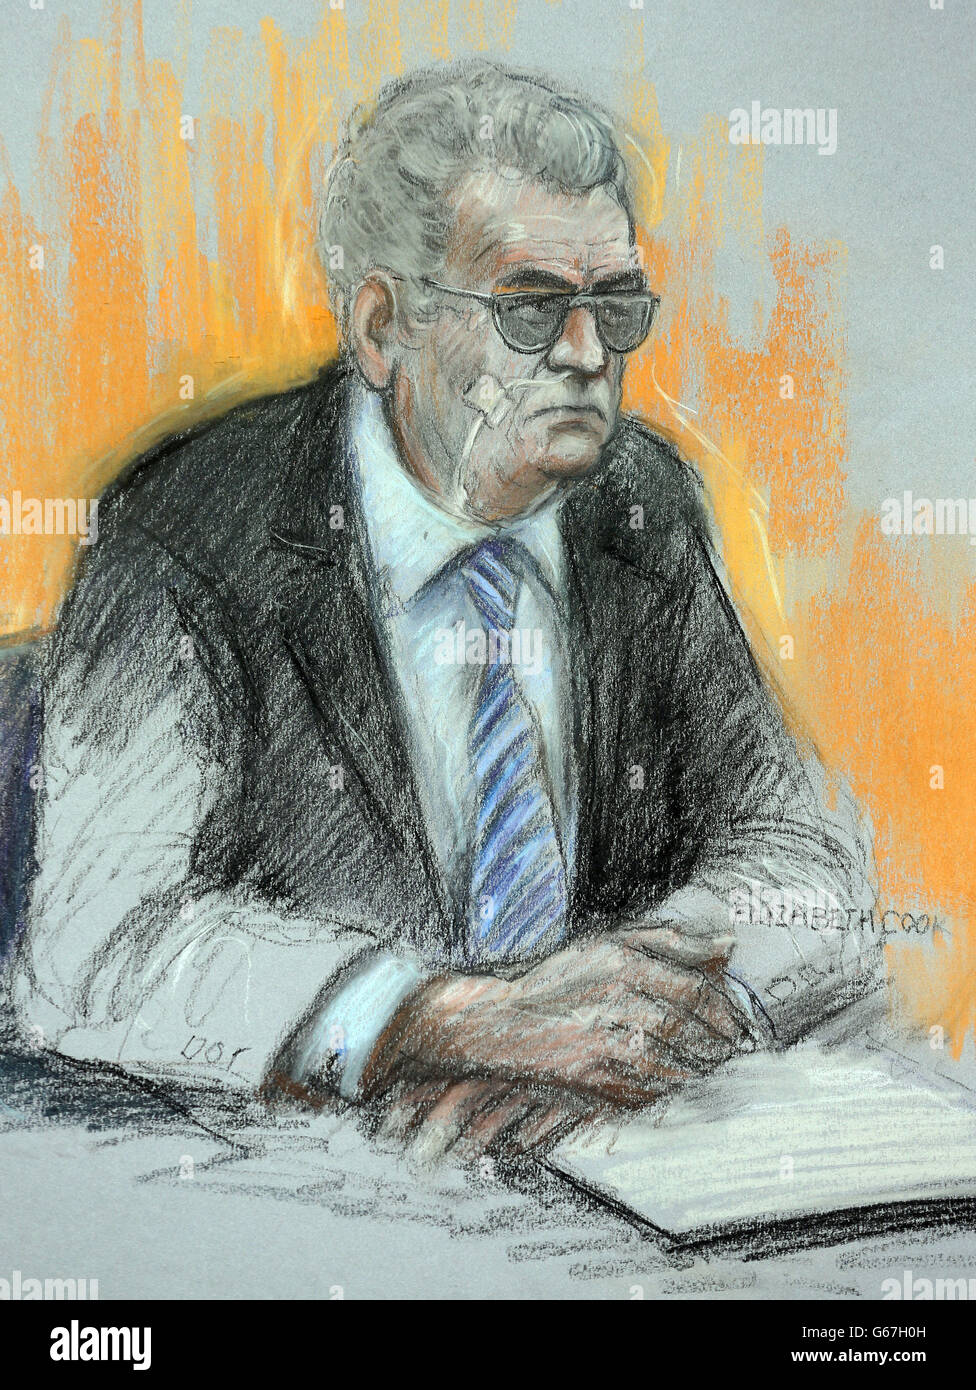 Court artist sketch by Elizabeth Cook of moors murderer Ian Brady appearing via video link at Manchester Civil Justice Centre. Stock Photo